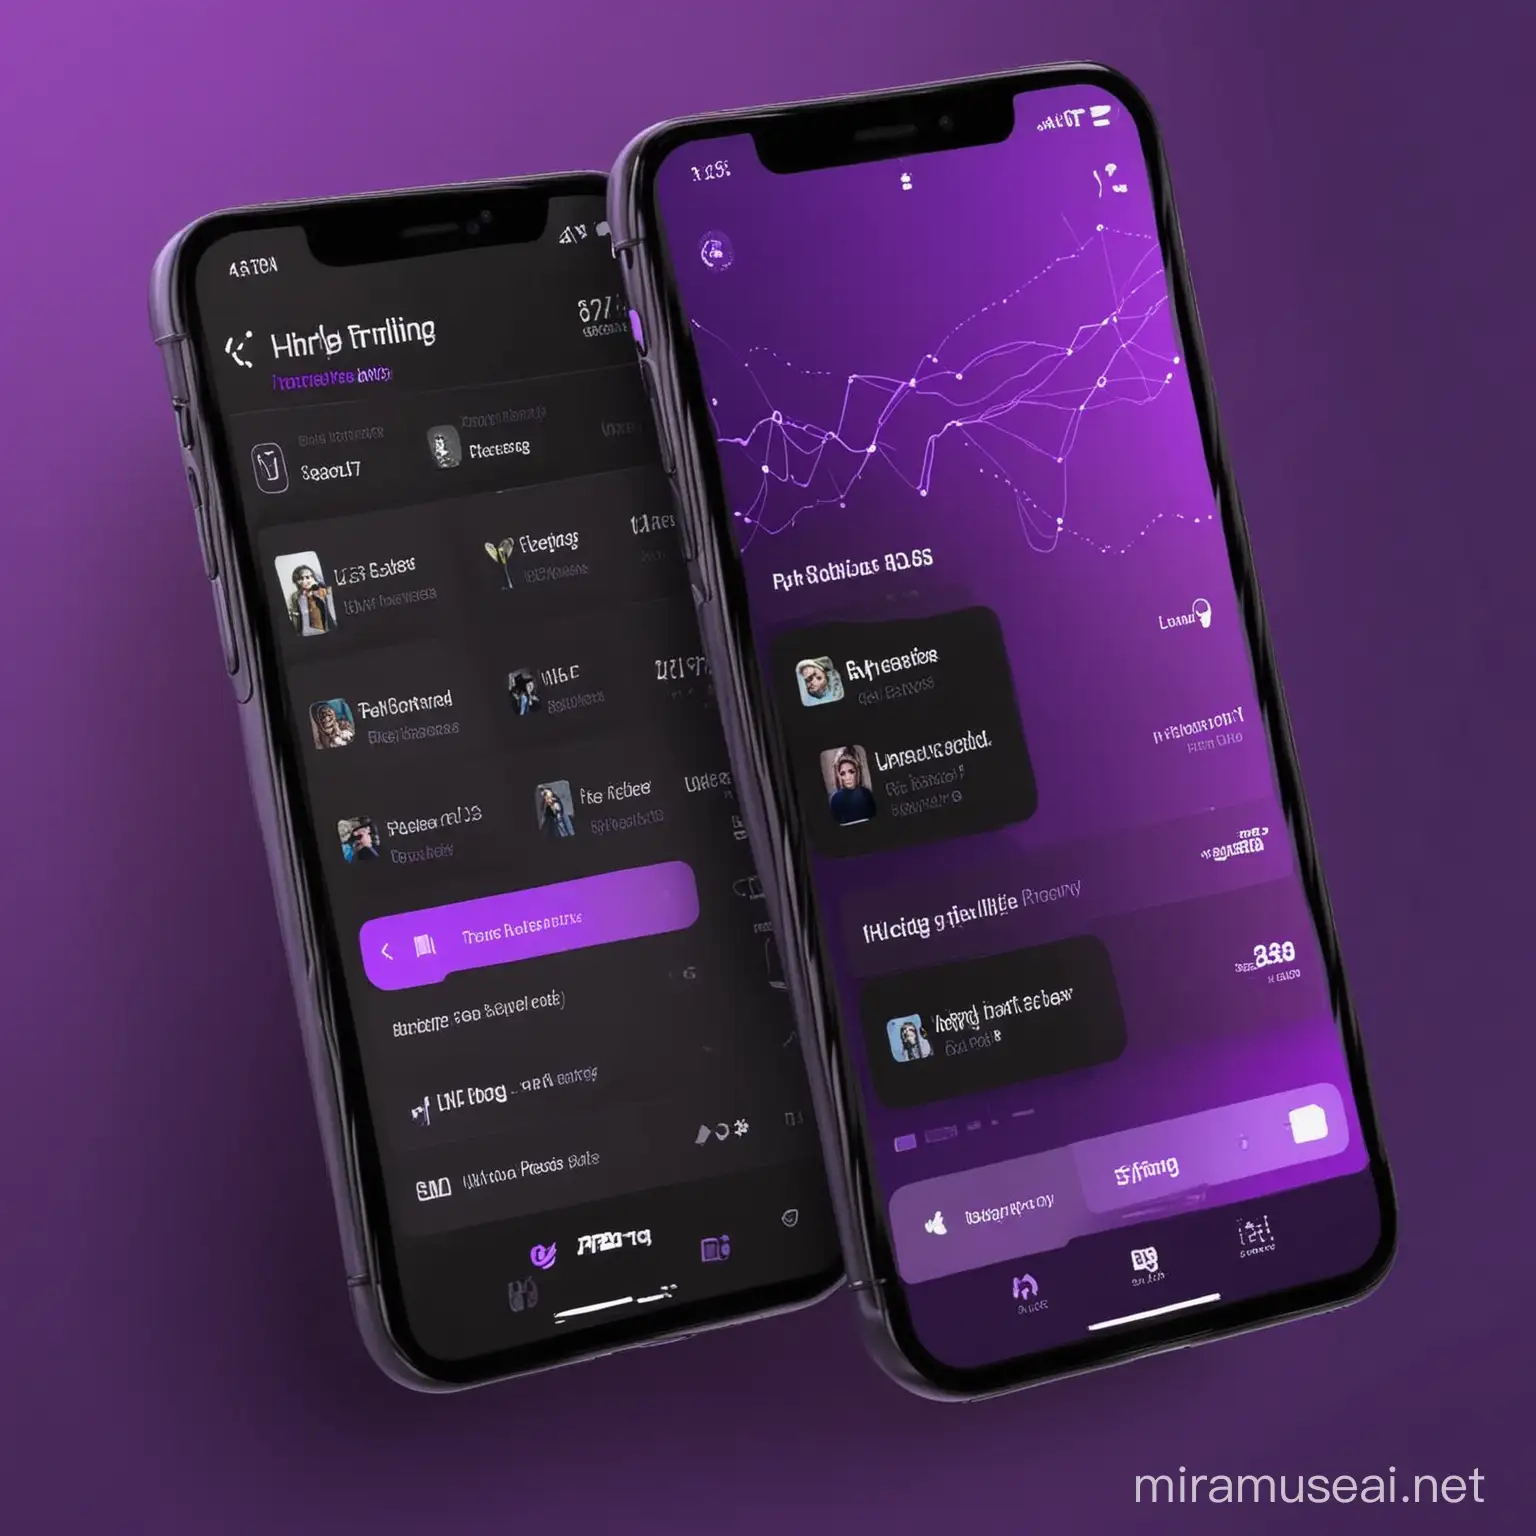 Vibrant Purple and Black Themed Mobile App with Gig Features for iOS and Android